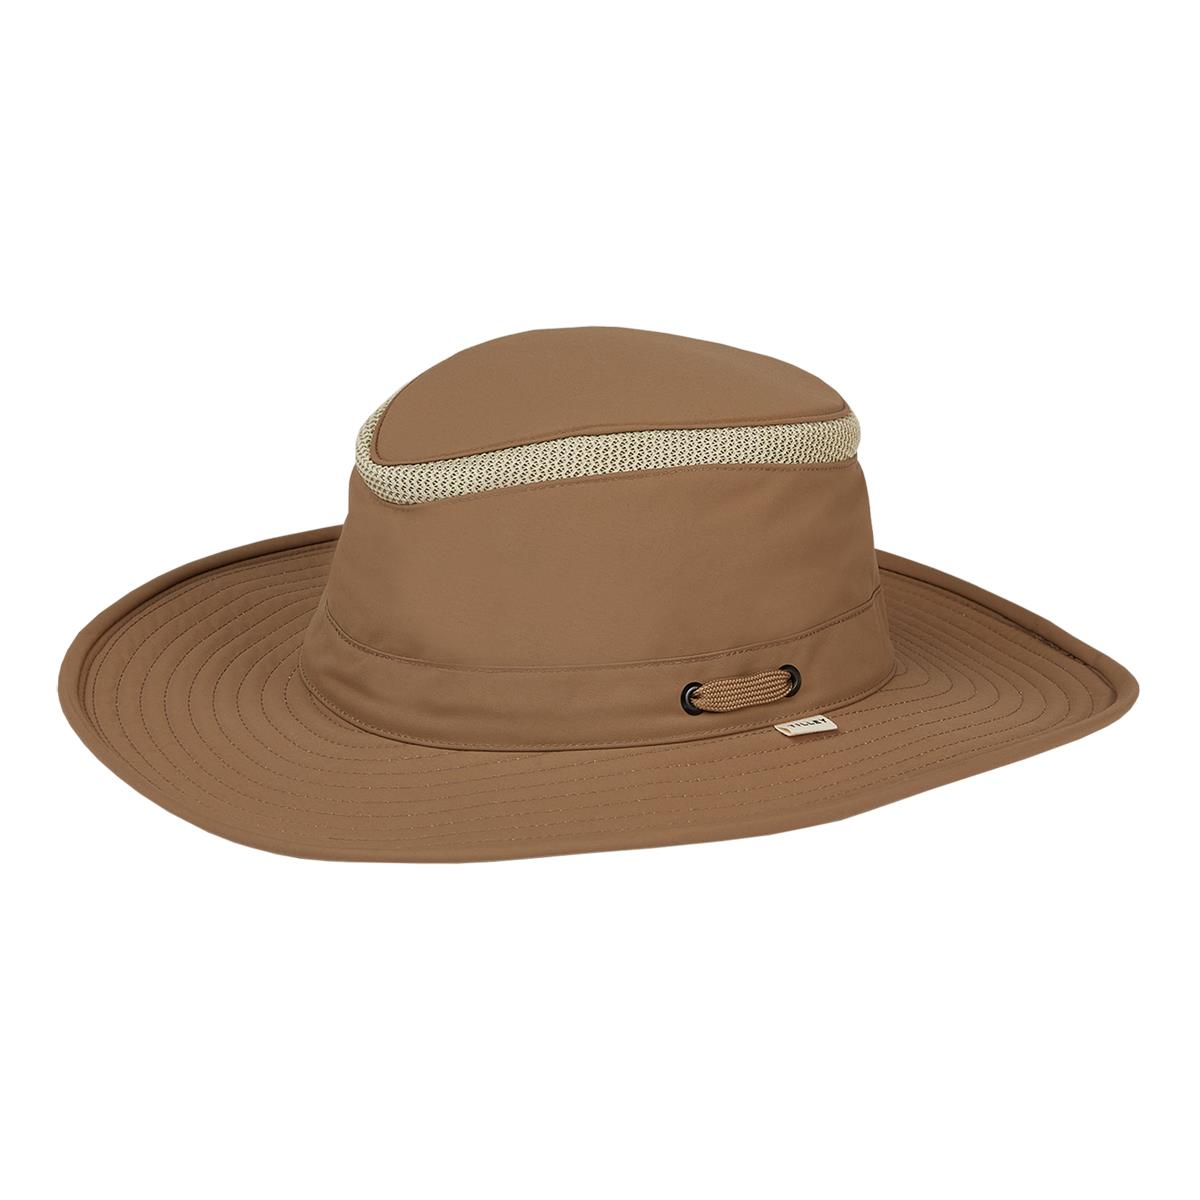 What are the characteristics of the Tilley Airflo Hat?